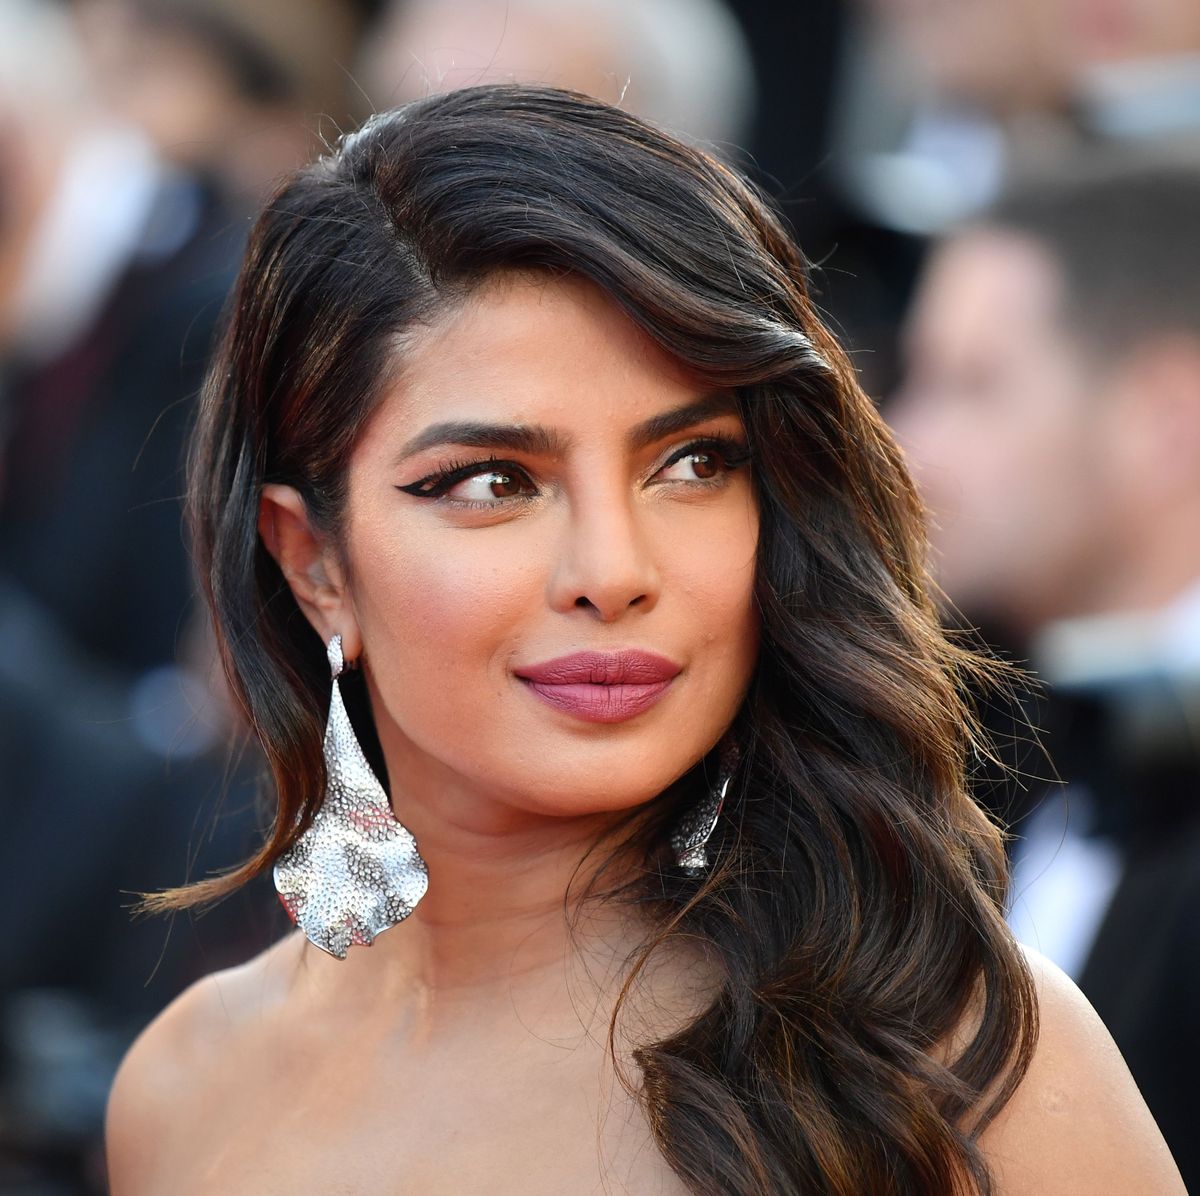 Neelam Indian Film Actress Nude Niple - Priyanka Chopra Wants You to Know She Is Her Own Person